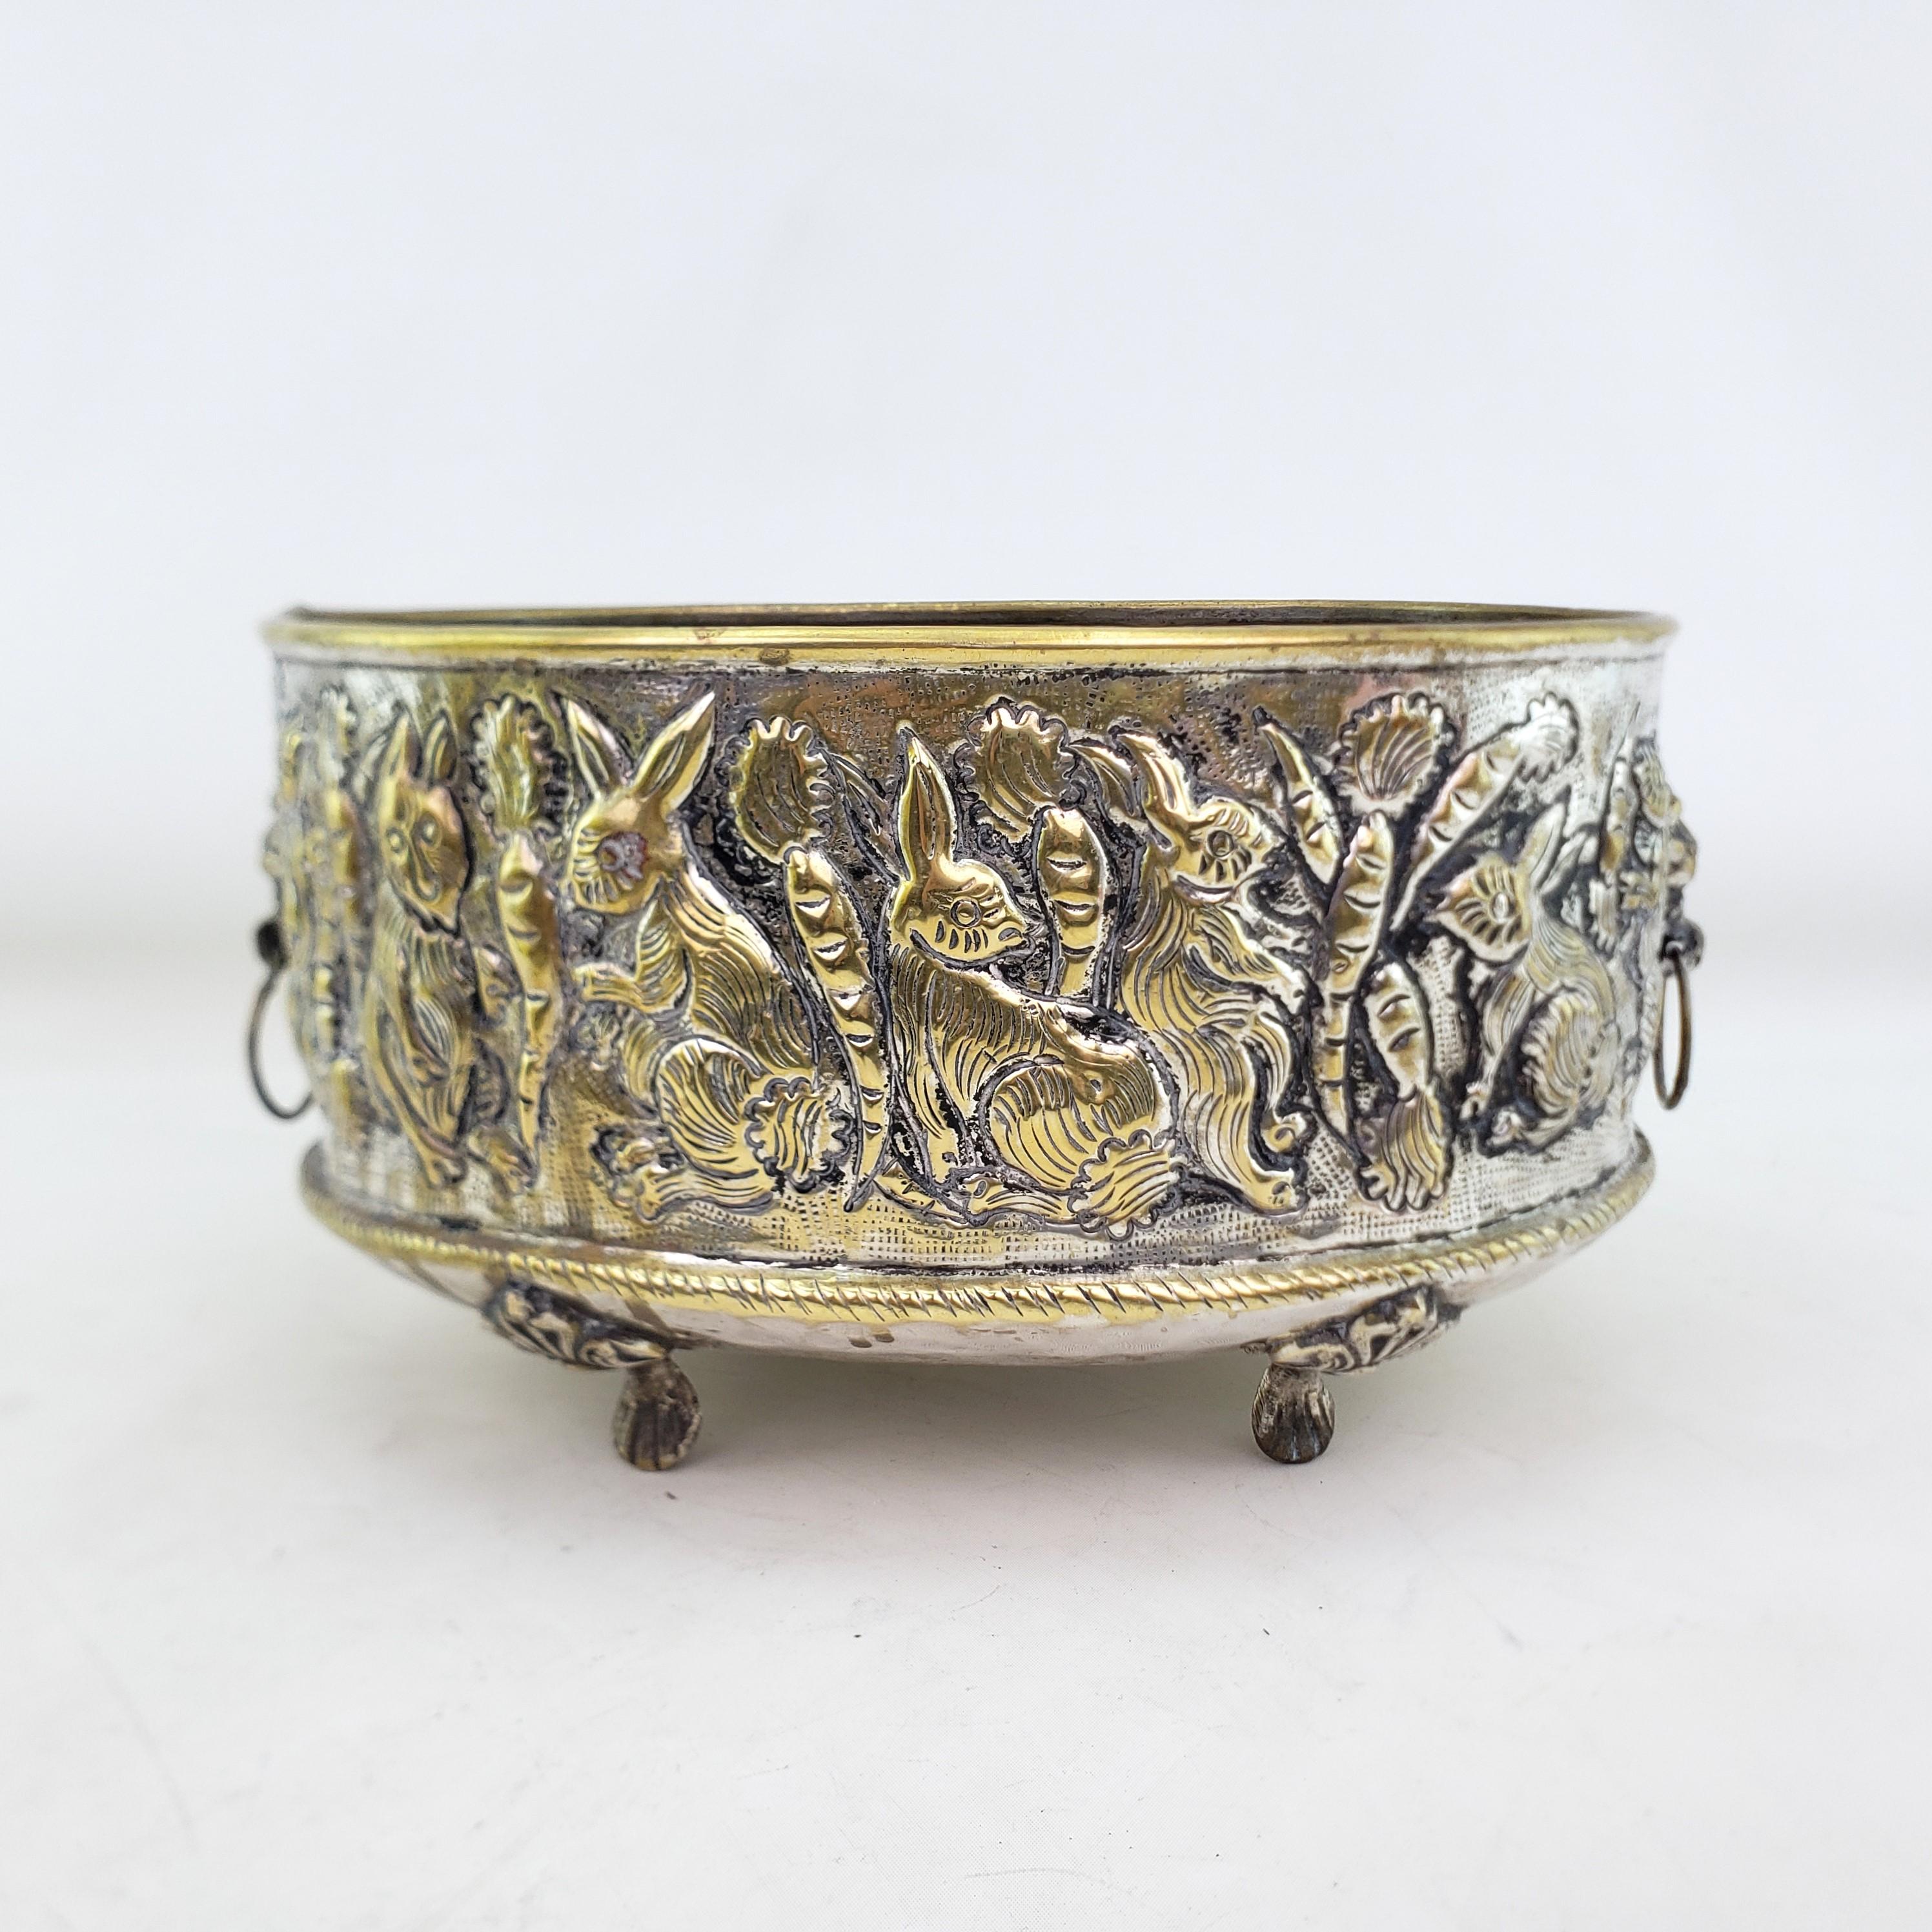 Antique English Hand-Crafted Plated Brass Planter with Whimsical Rabbits For Sale 1